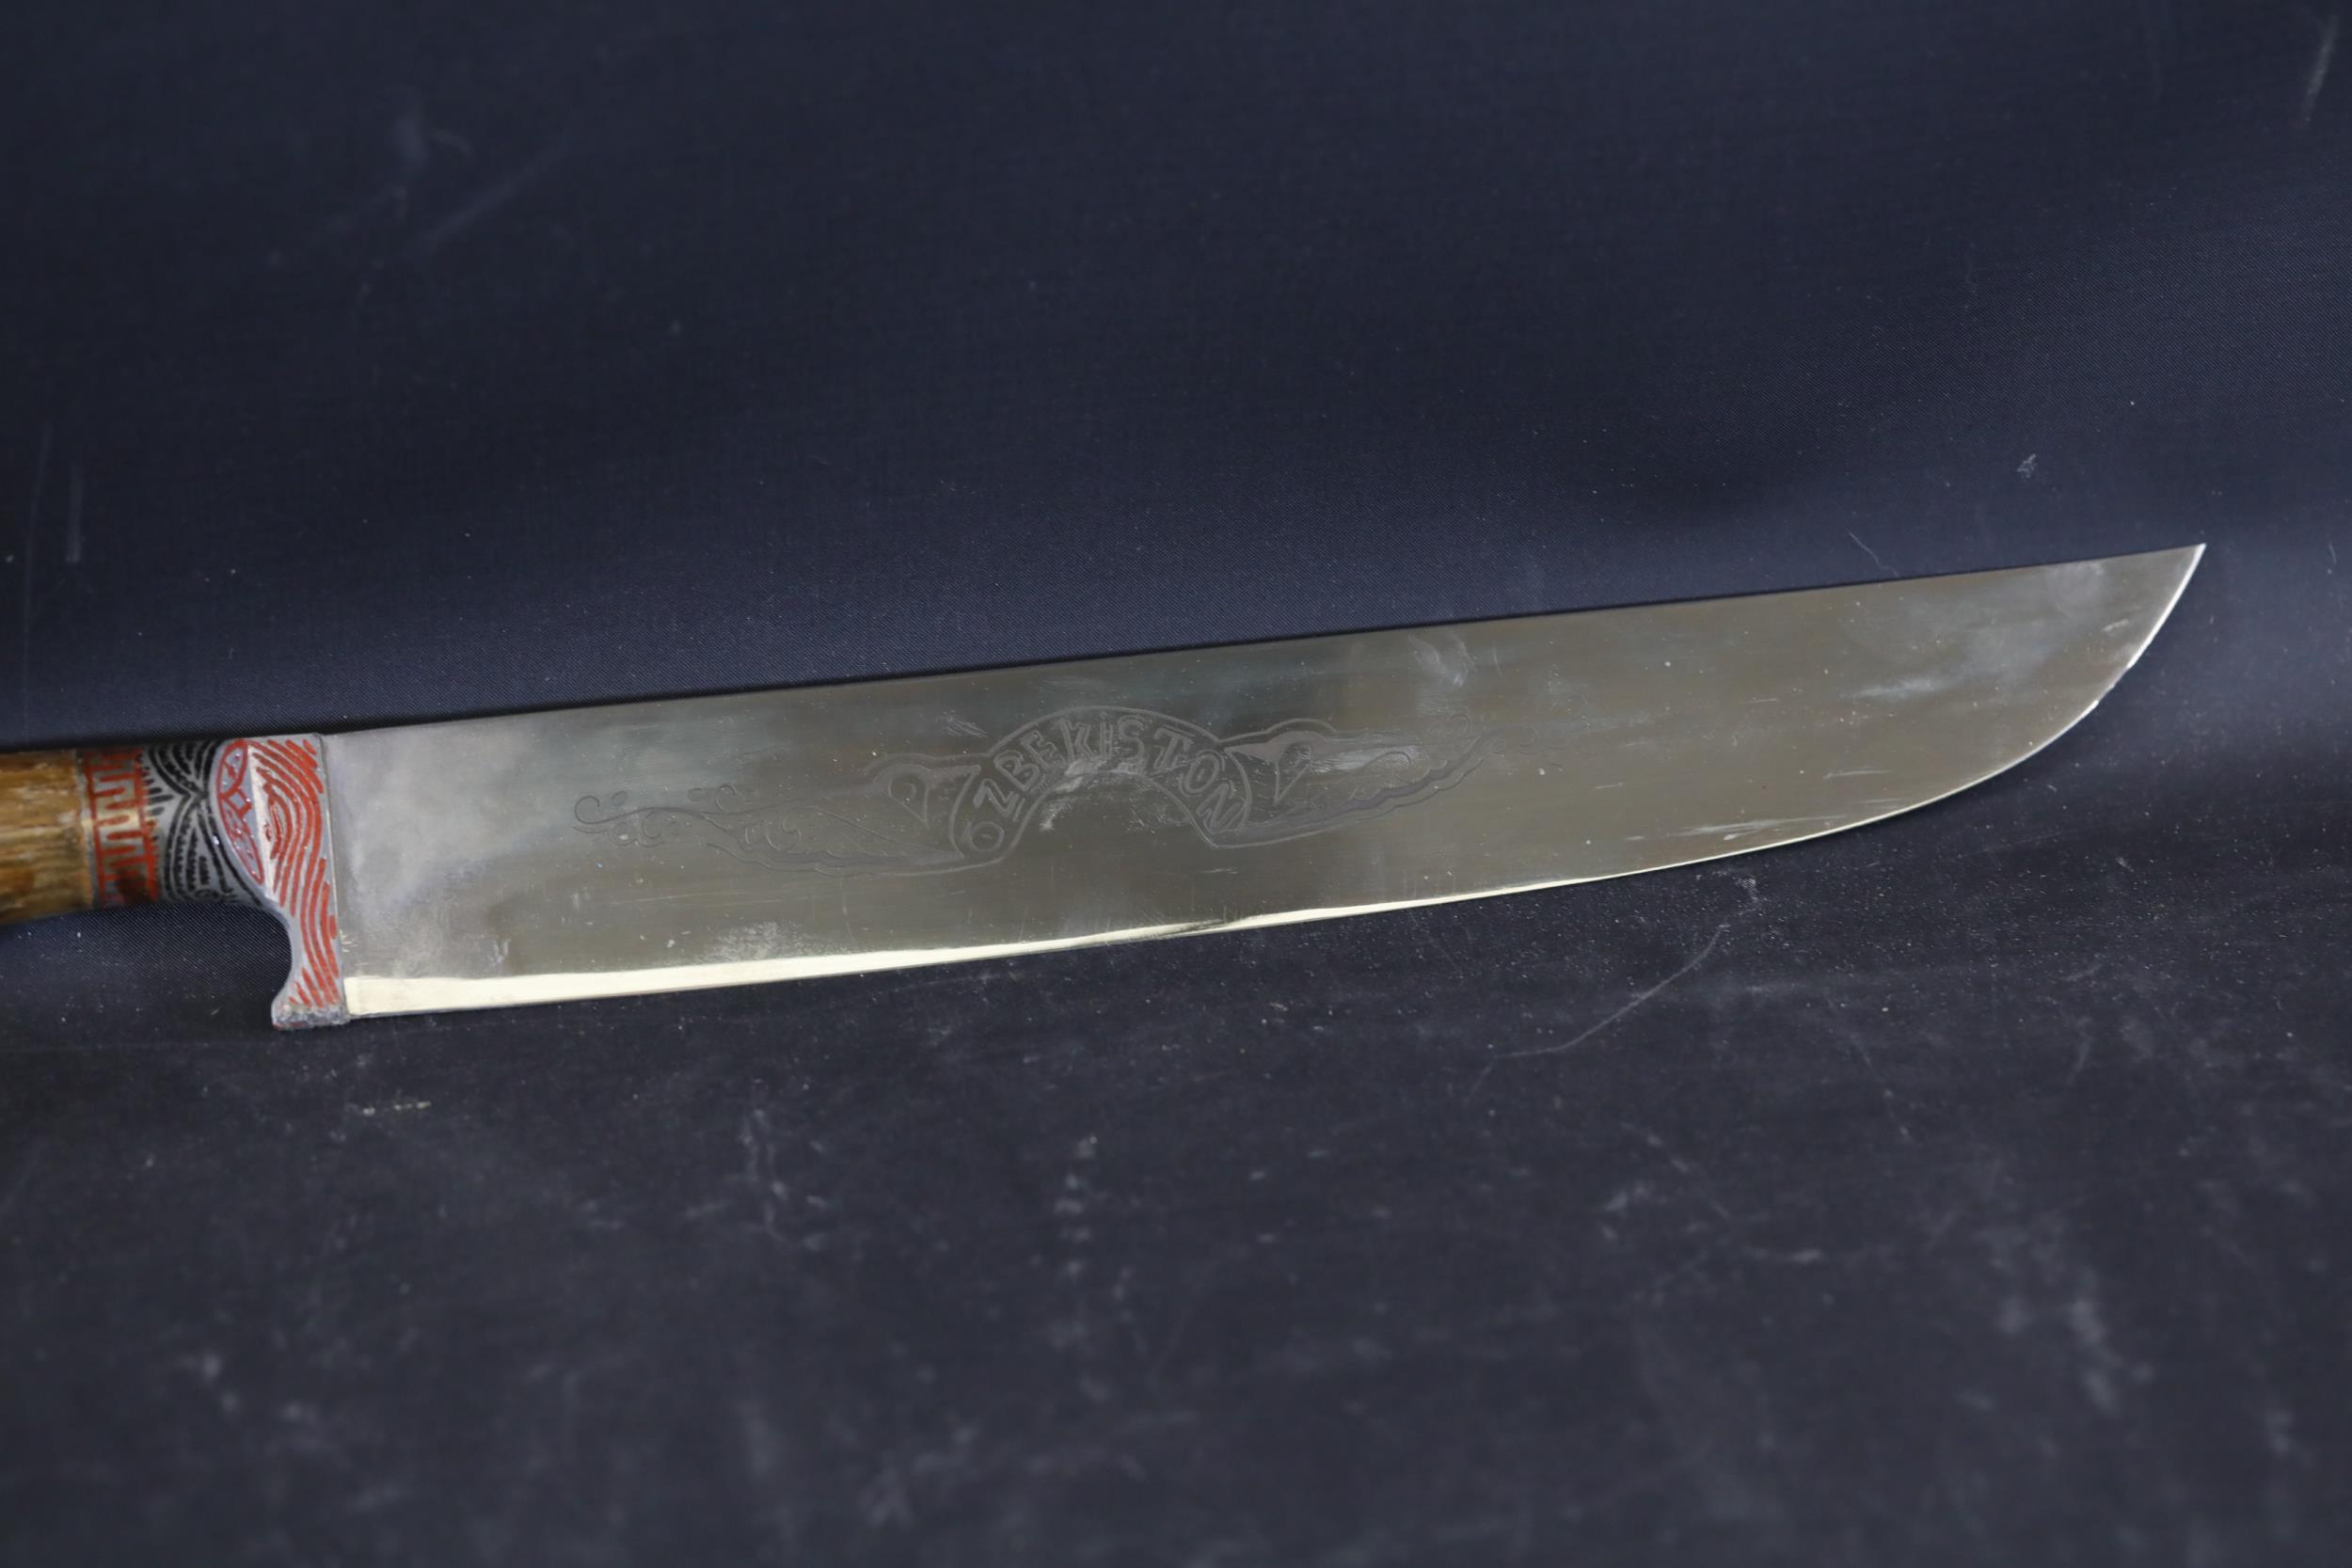 Ozbekiston Engraved Knife in good condition - Image 7 of 14